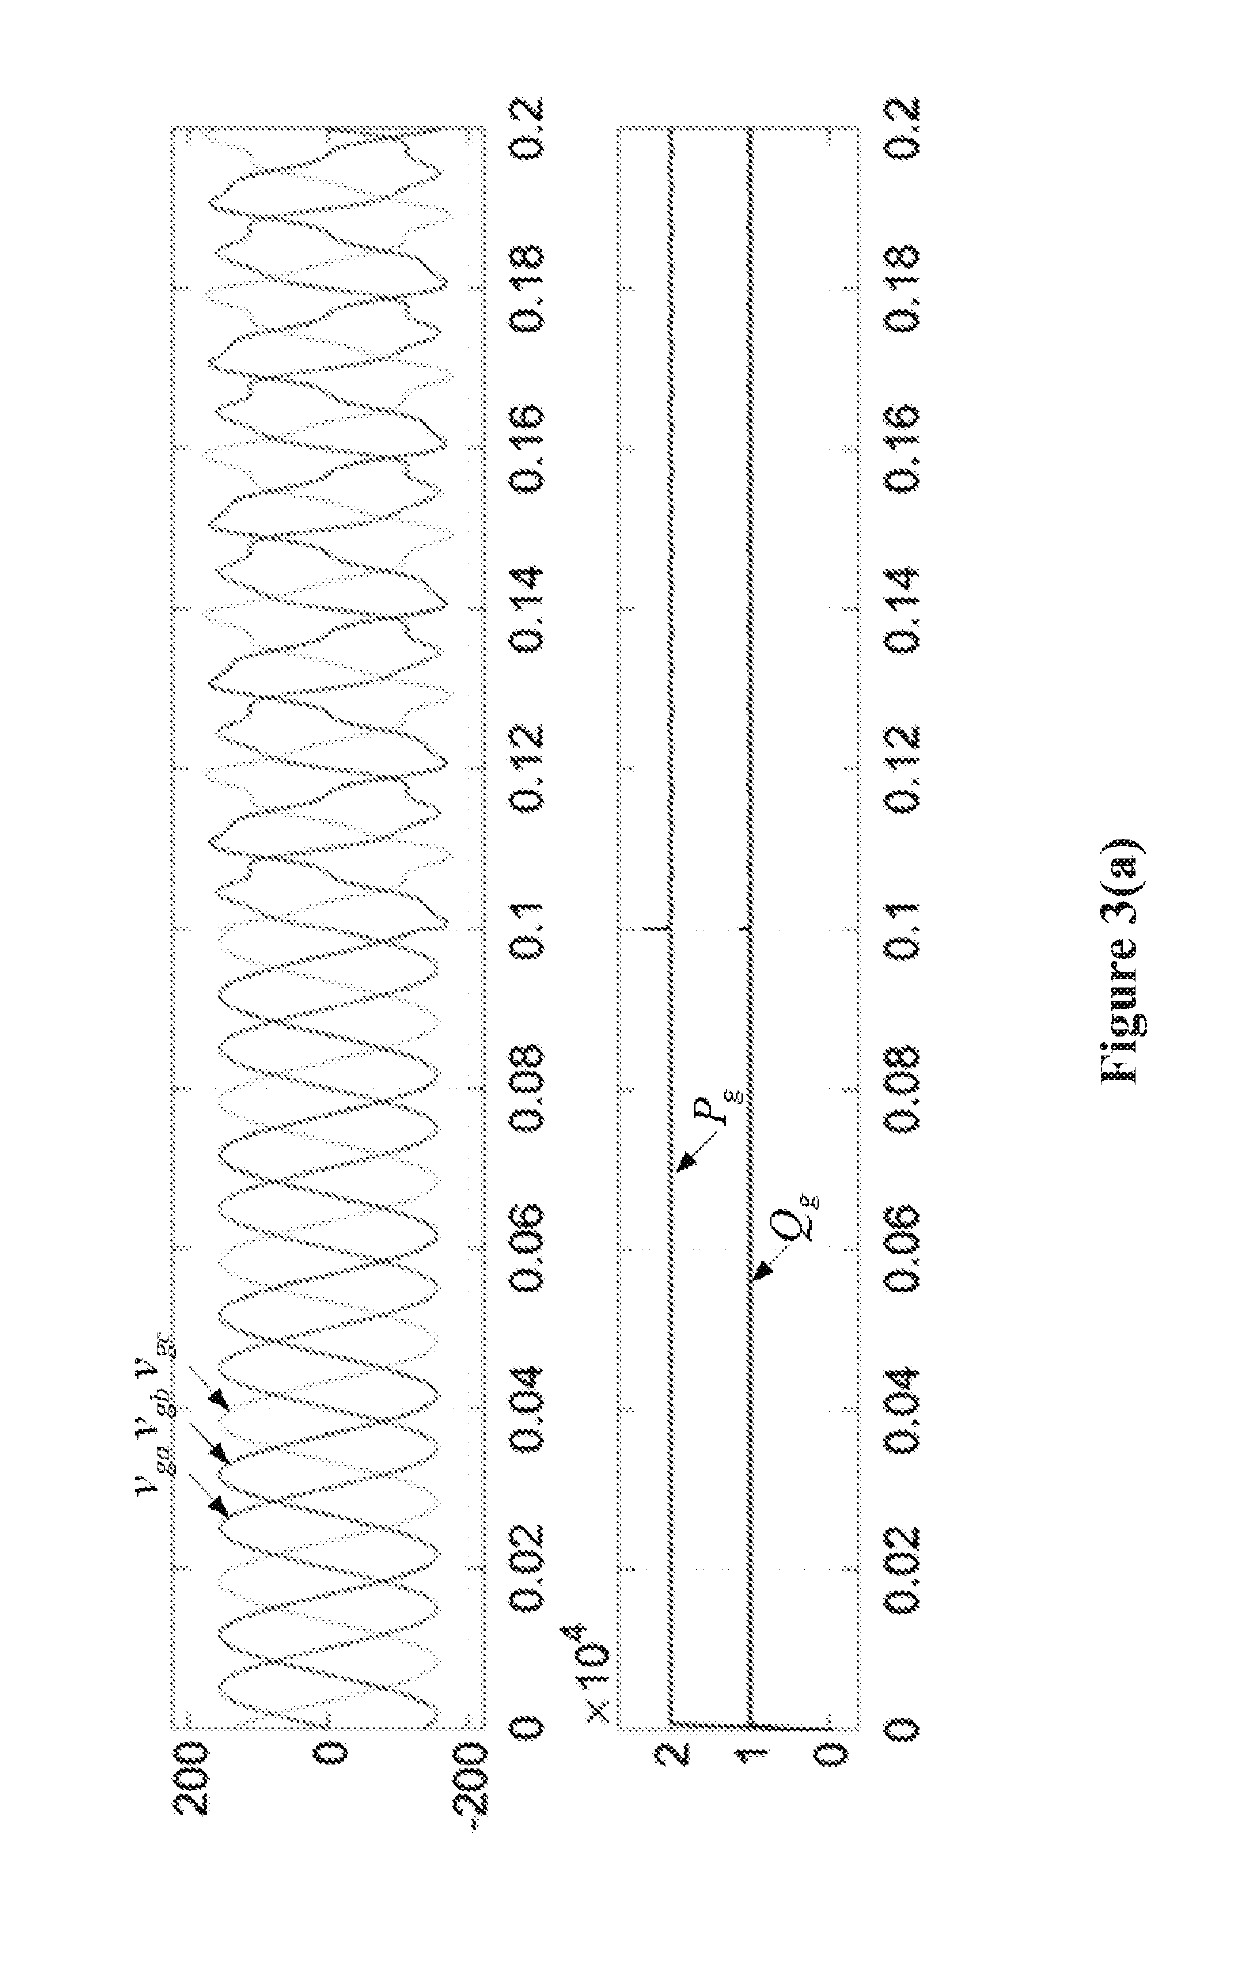 Nonlinear control method for micro-grid inverter with Anti-disturbance